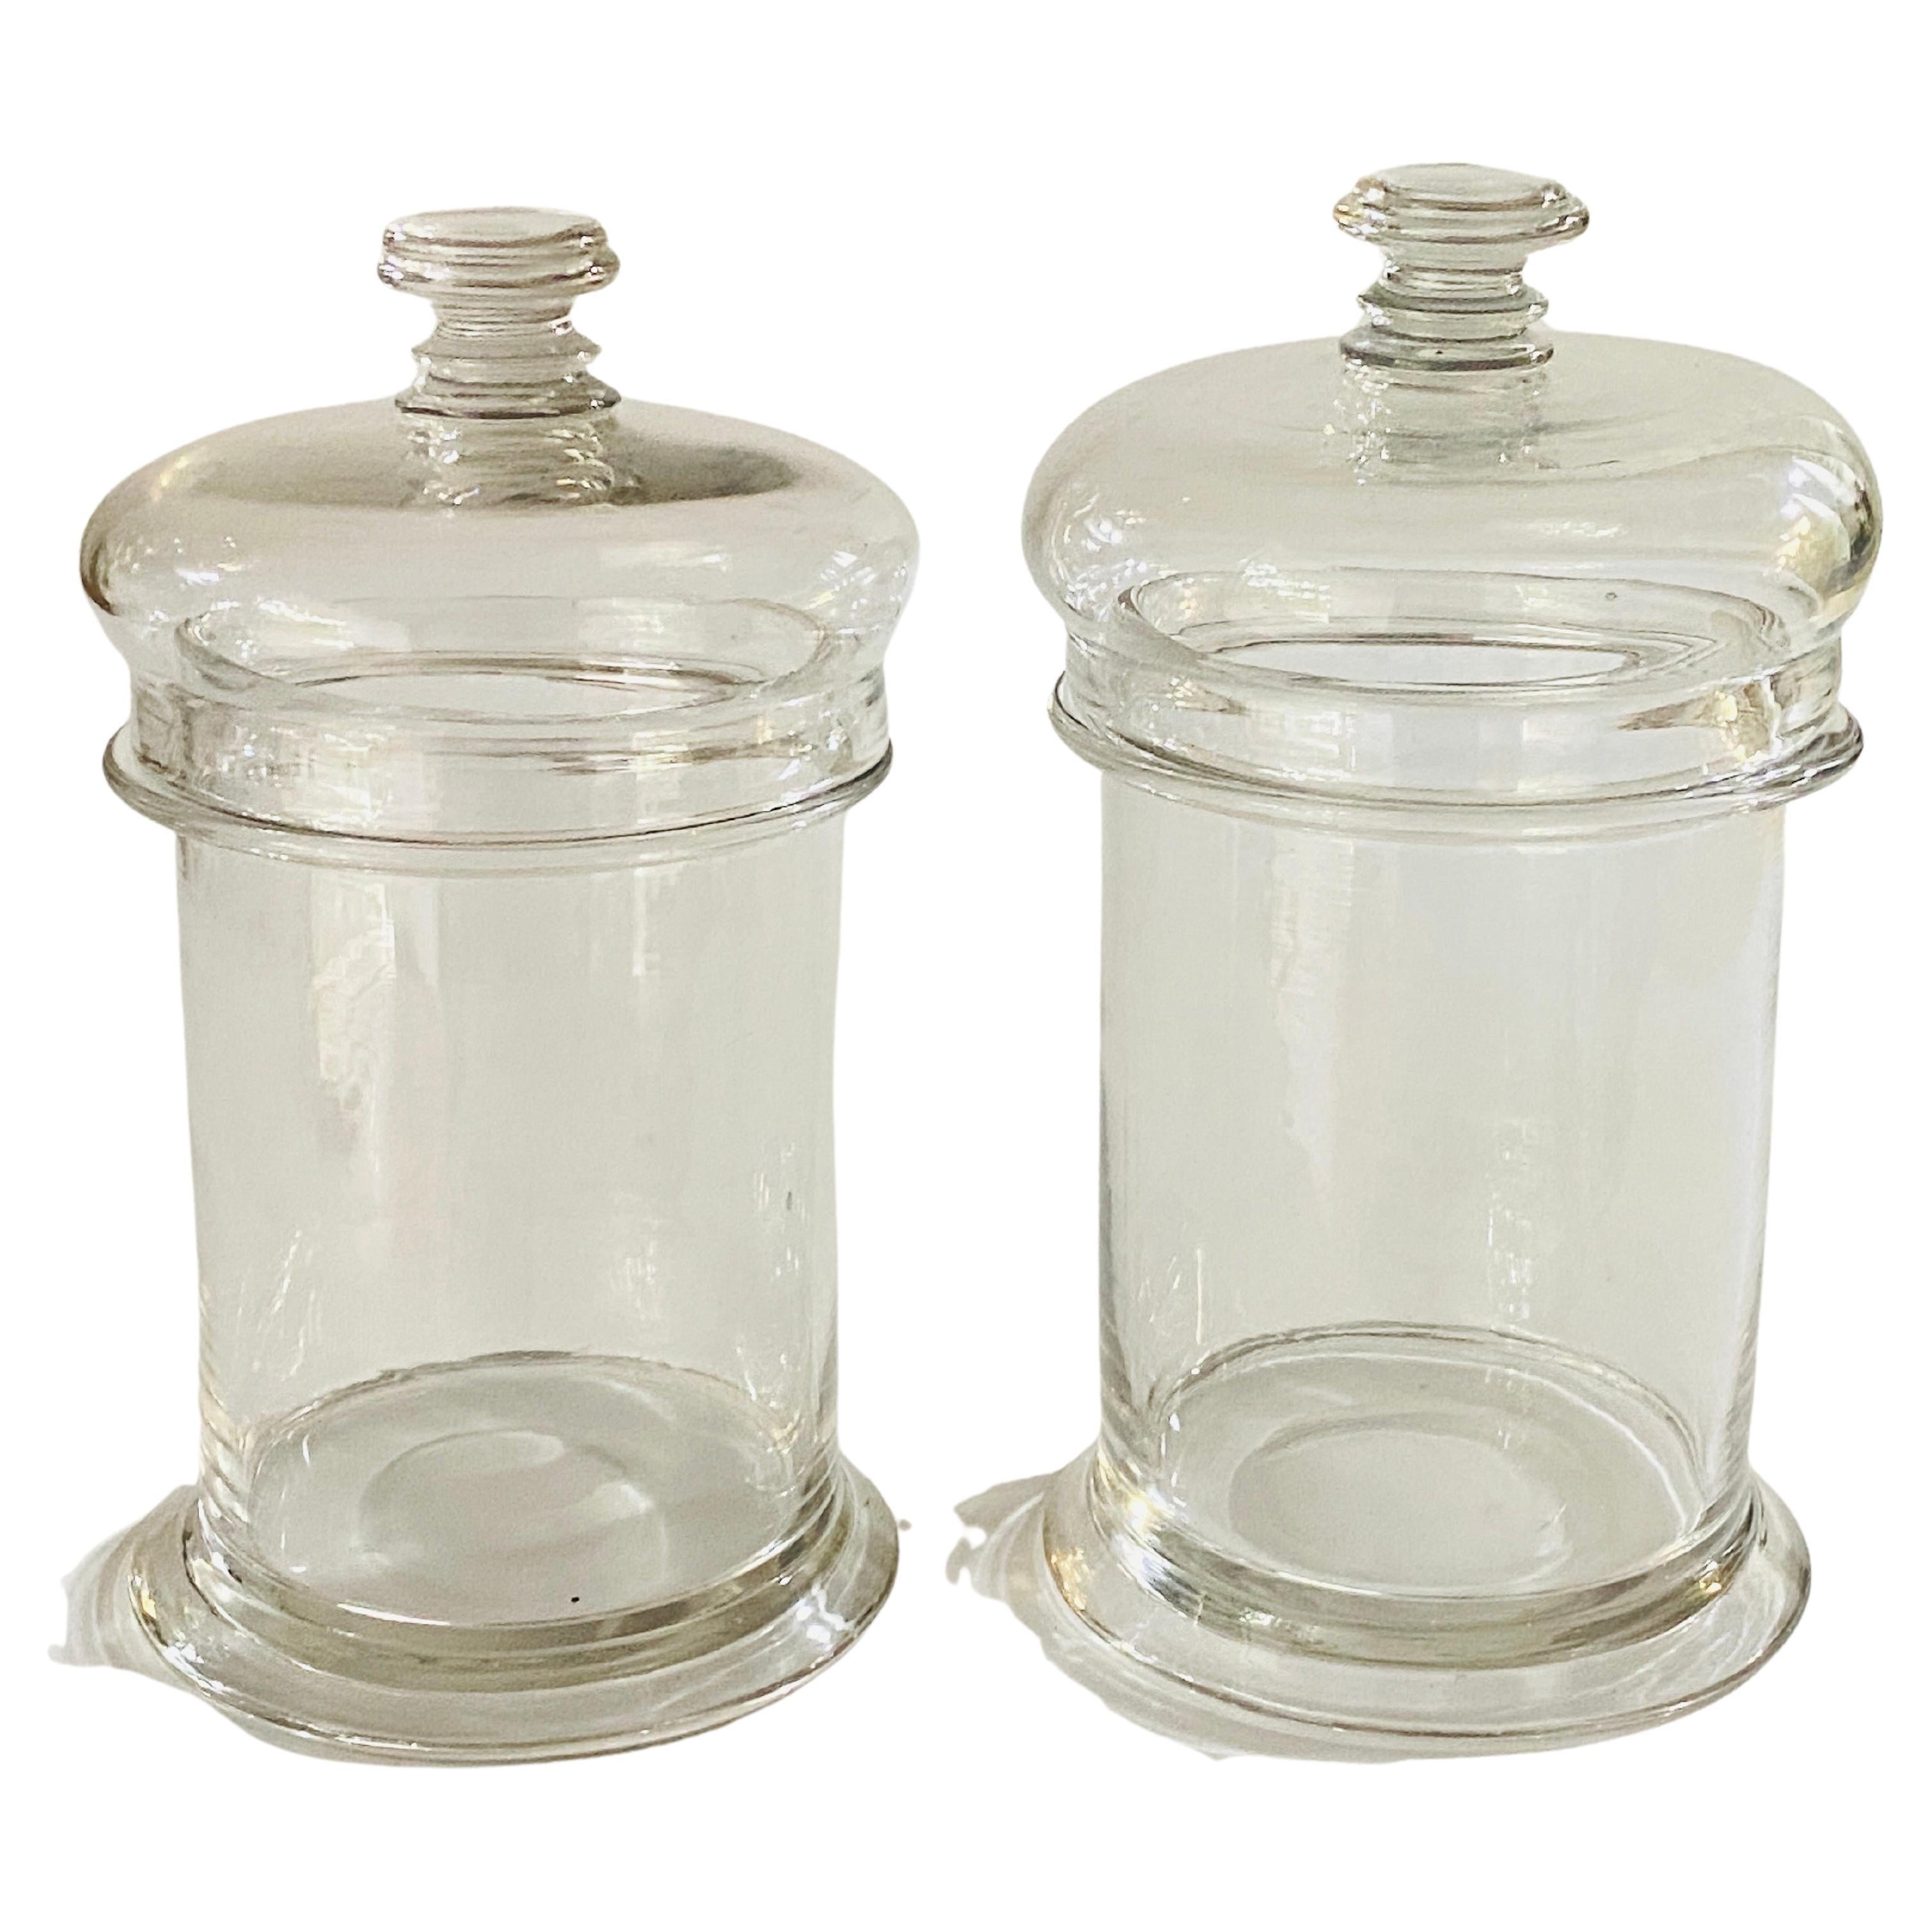 These Glass pot are in Glass. They have a glass lid too. The condition is Good It has been done in France, circa 1970.
Canbe used as bottle, boxes or Pot.